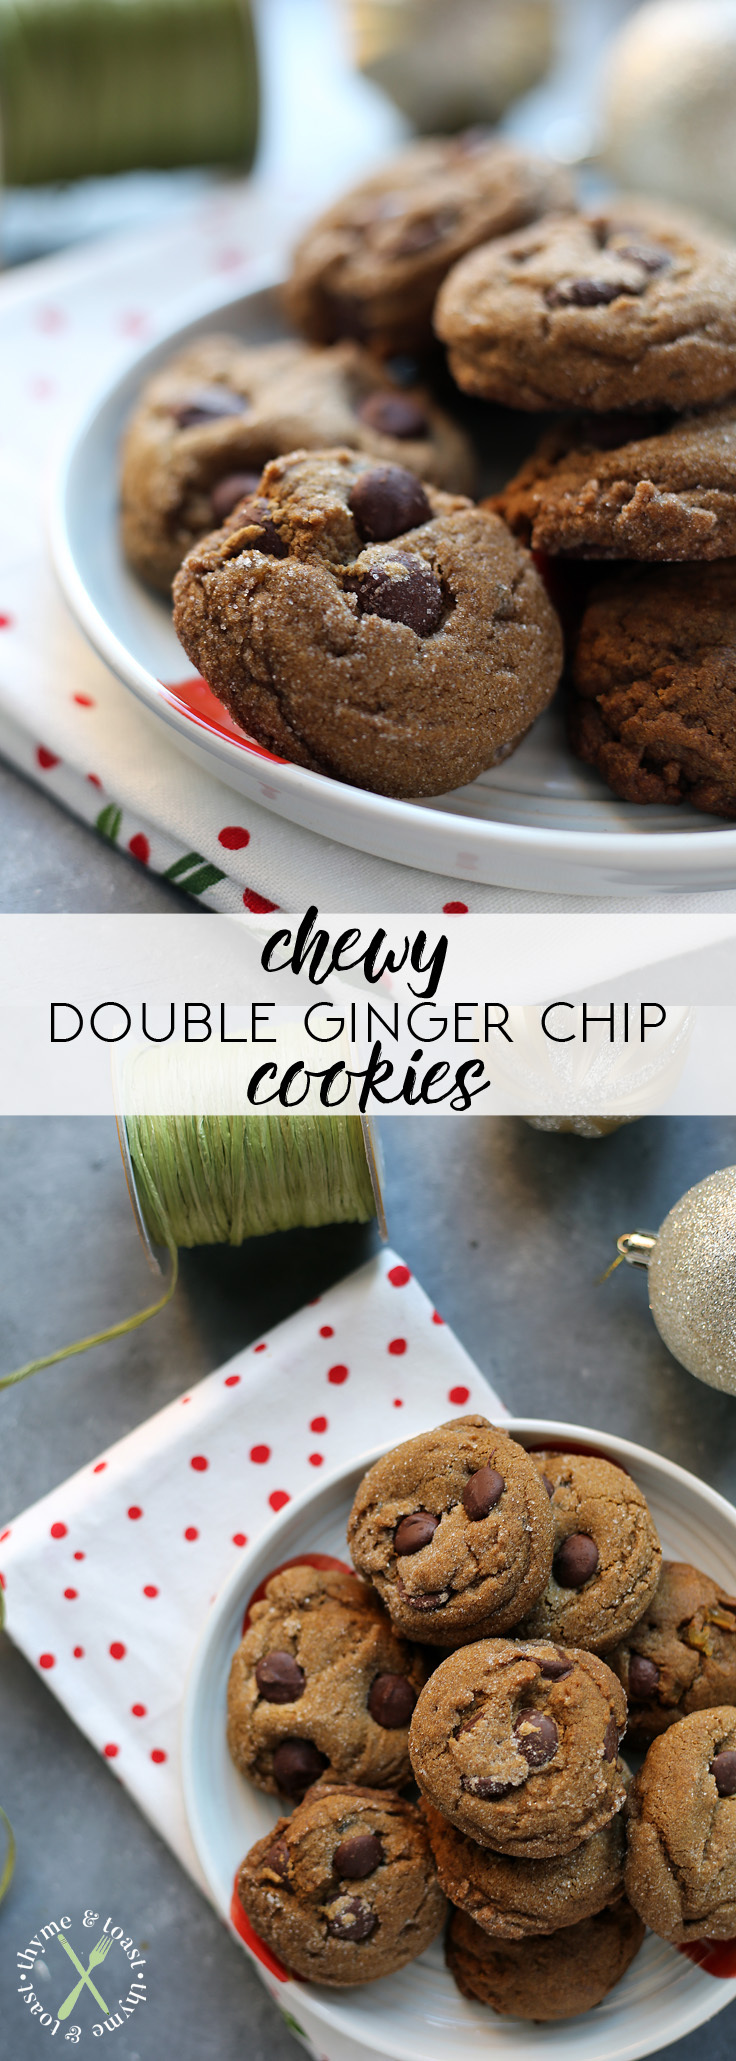 Chewy Double Ginger Chip Cookies